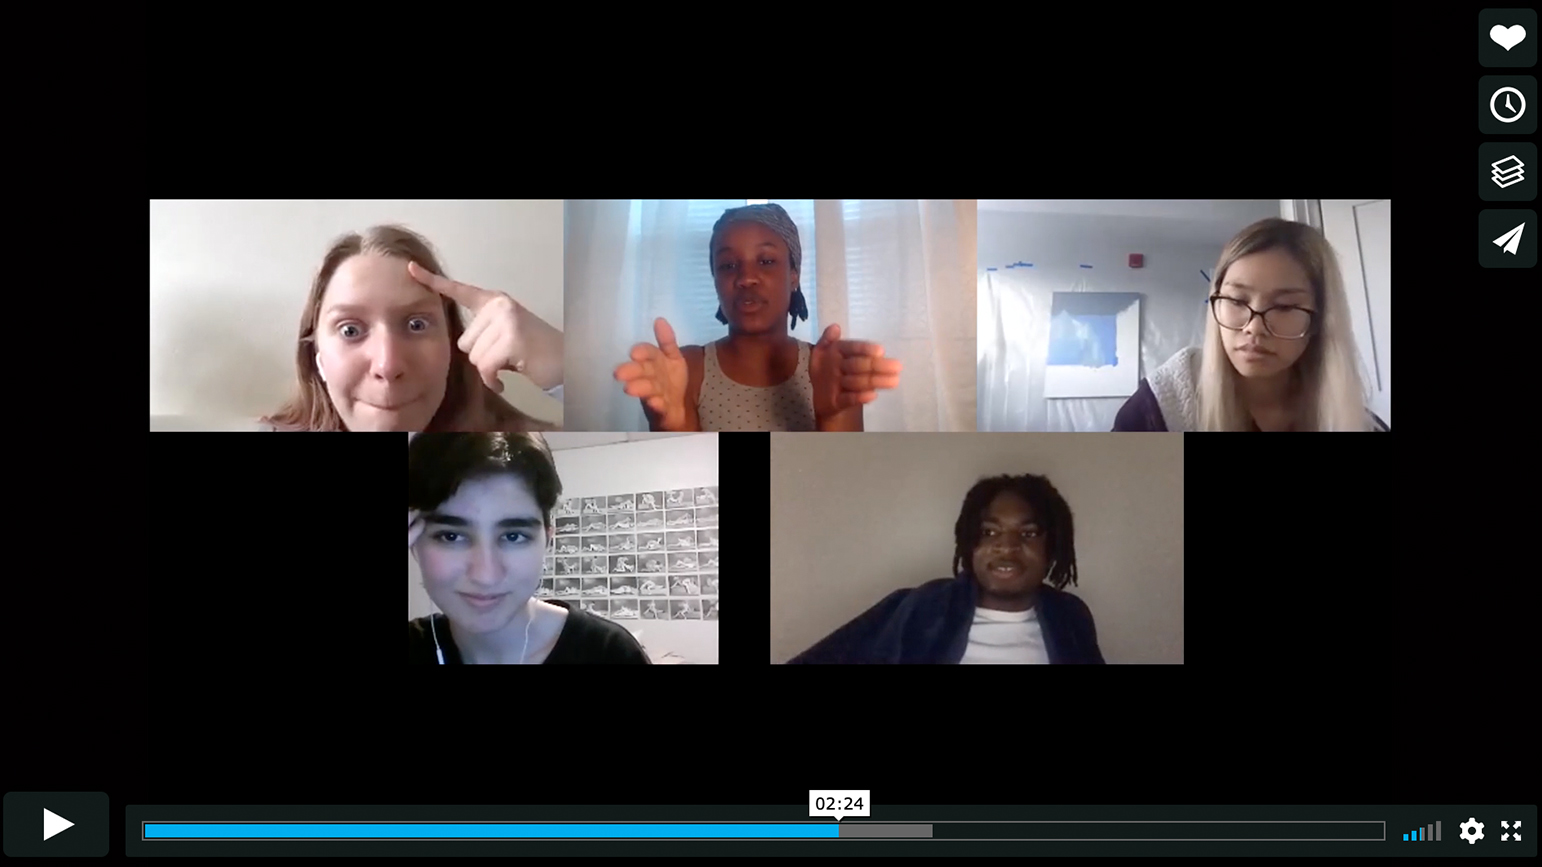 Still from a video showing five people talking on Zoom